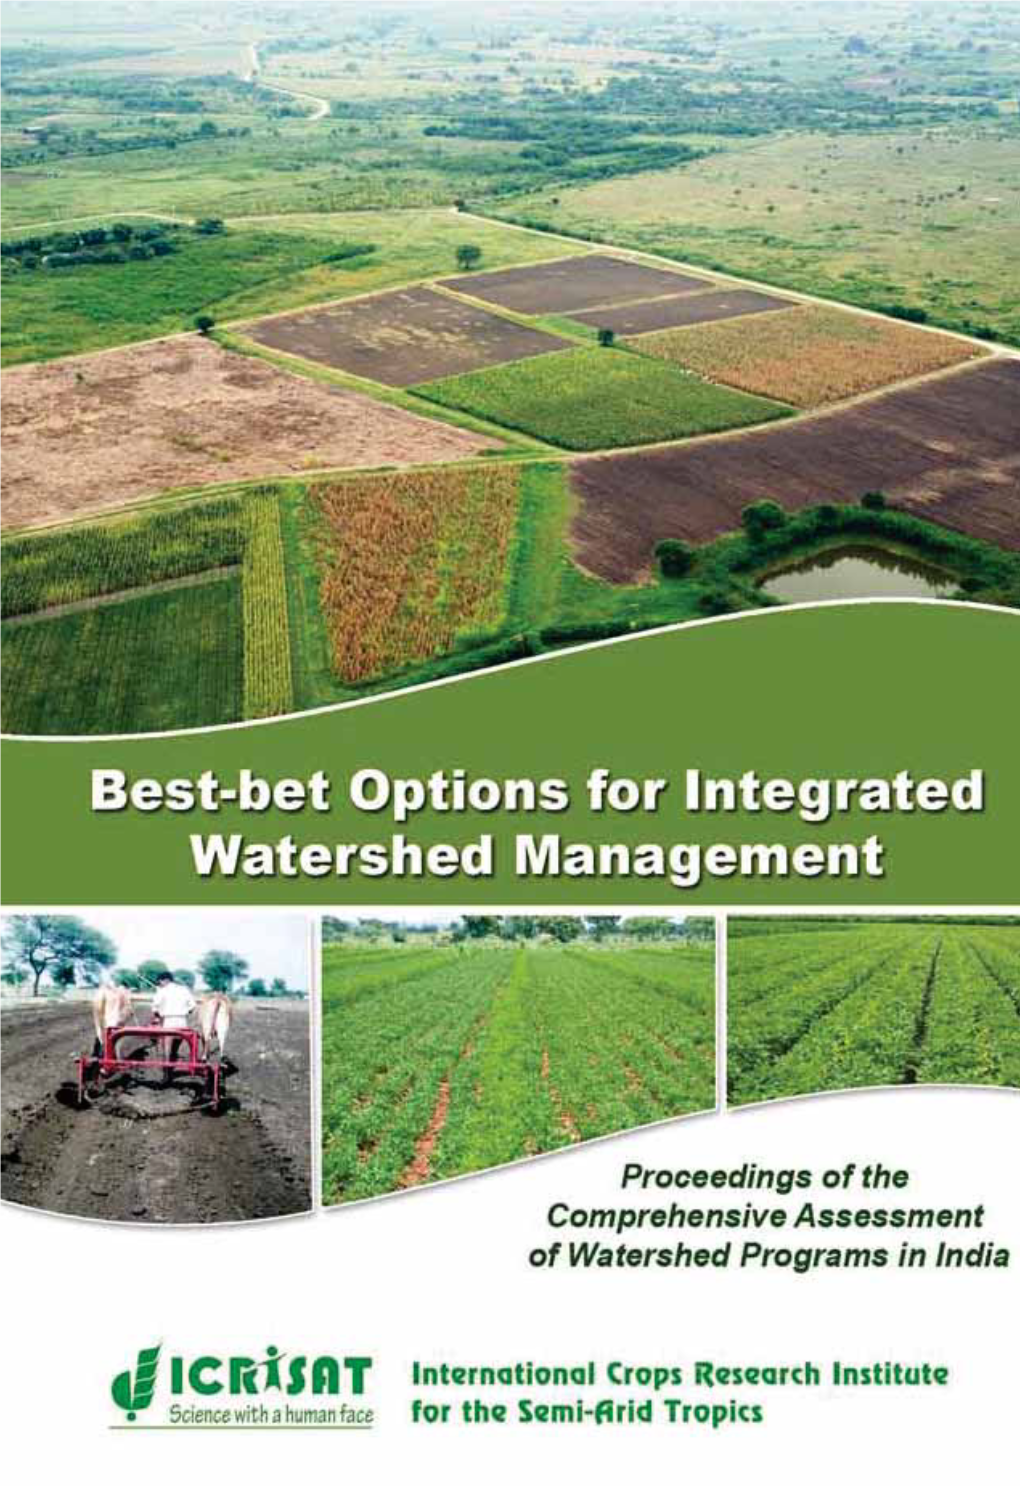 Watershed Management Approaches